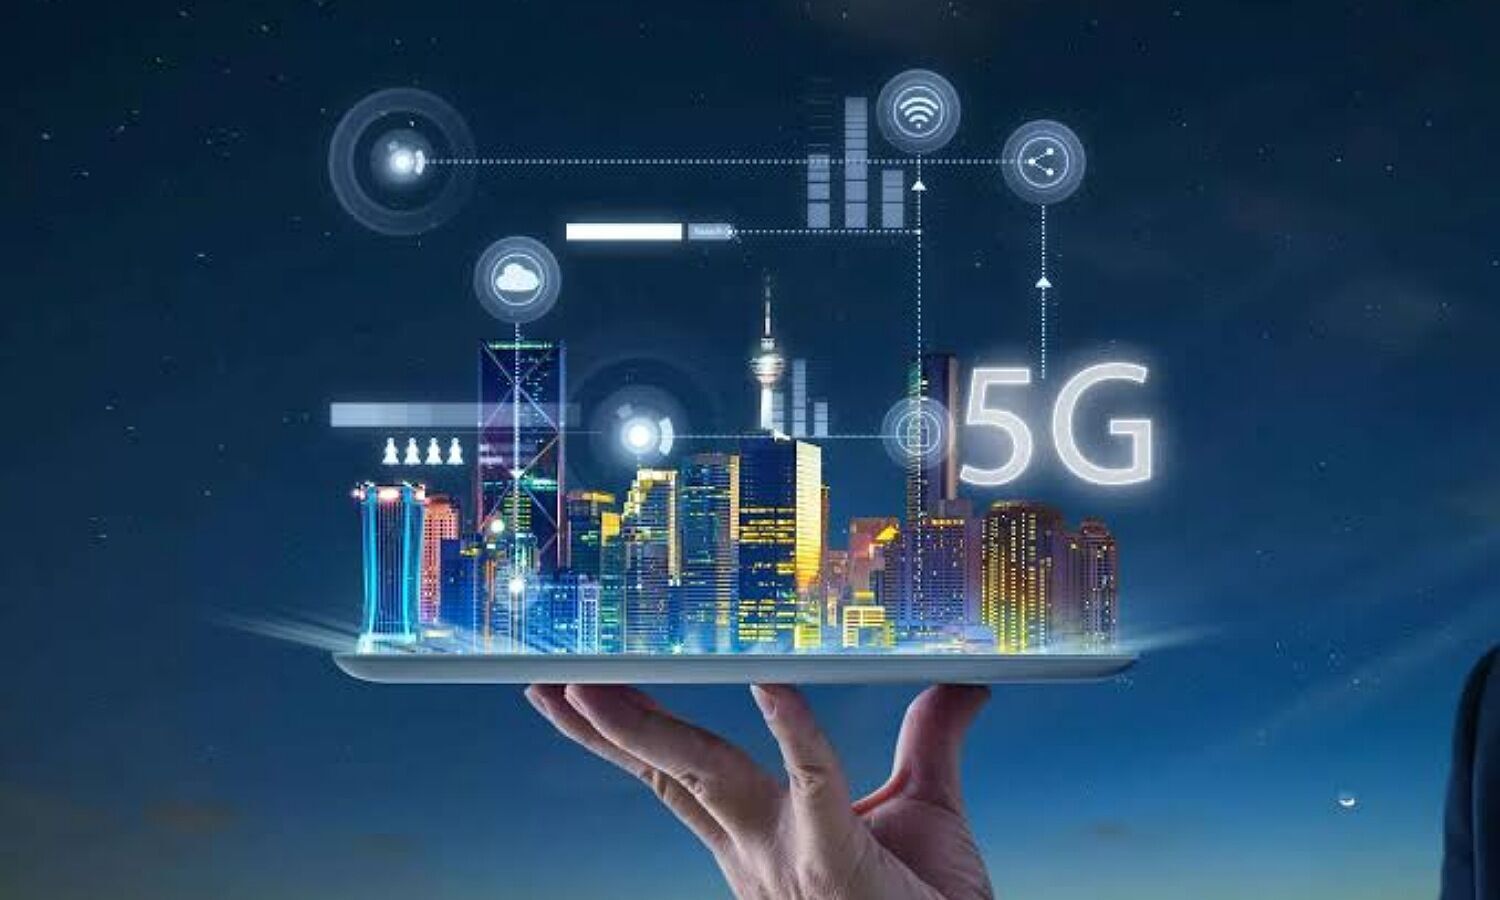 5G Services in 13 Cities: 5G services will start in the country from October 1, first in these 13 cities